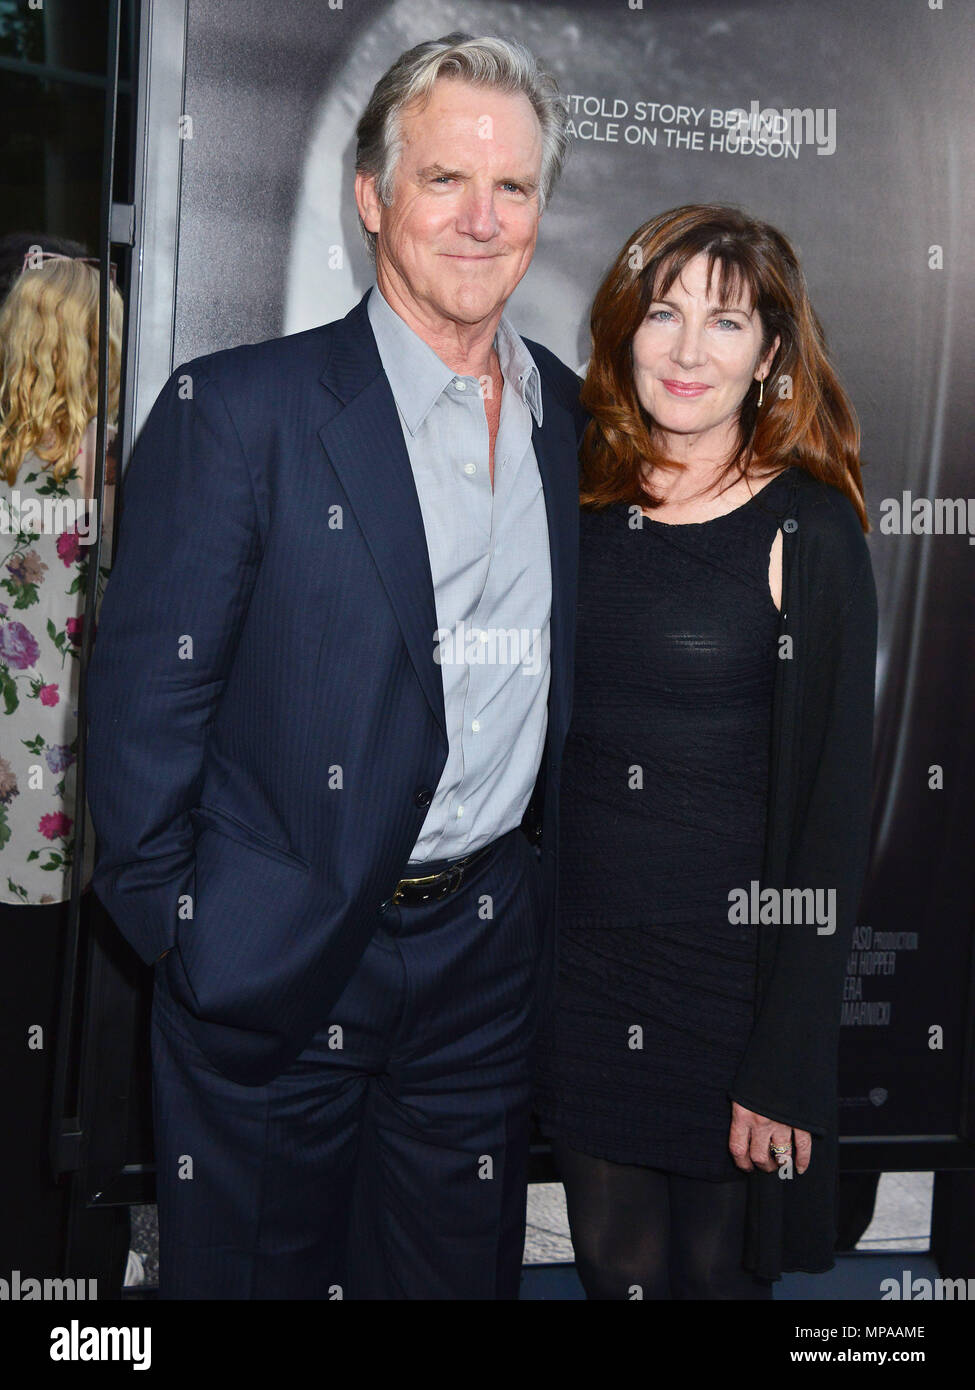 Jamey Sheridan, Colette Kilroy at the Sully Premiere at the DGA Theatre in Los Angeles. September 8, 2016.Jamey Sheridan, Colette Kilroy ------------- Red Carpet Event, Vertical, USA, Film Industry, Celebrities,  Photography, Bestof, Arts Culture and Entertainment, Topix Celebrities fashion /  Vertical, Best of, Event in Hollywood Life - California,  Red Carpet and backstage, USA, Film Industry, Celebrities,  movie celebrities, TV celebrities, Music celebrities, Photography, Bestof, Arts Culture and Entertainment,  Topix, Three Quarters, vertical, one person,, from the year , 2016, inquiry tsu Stock Photo